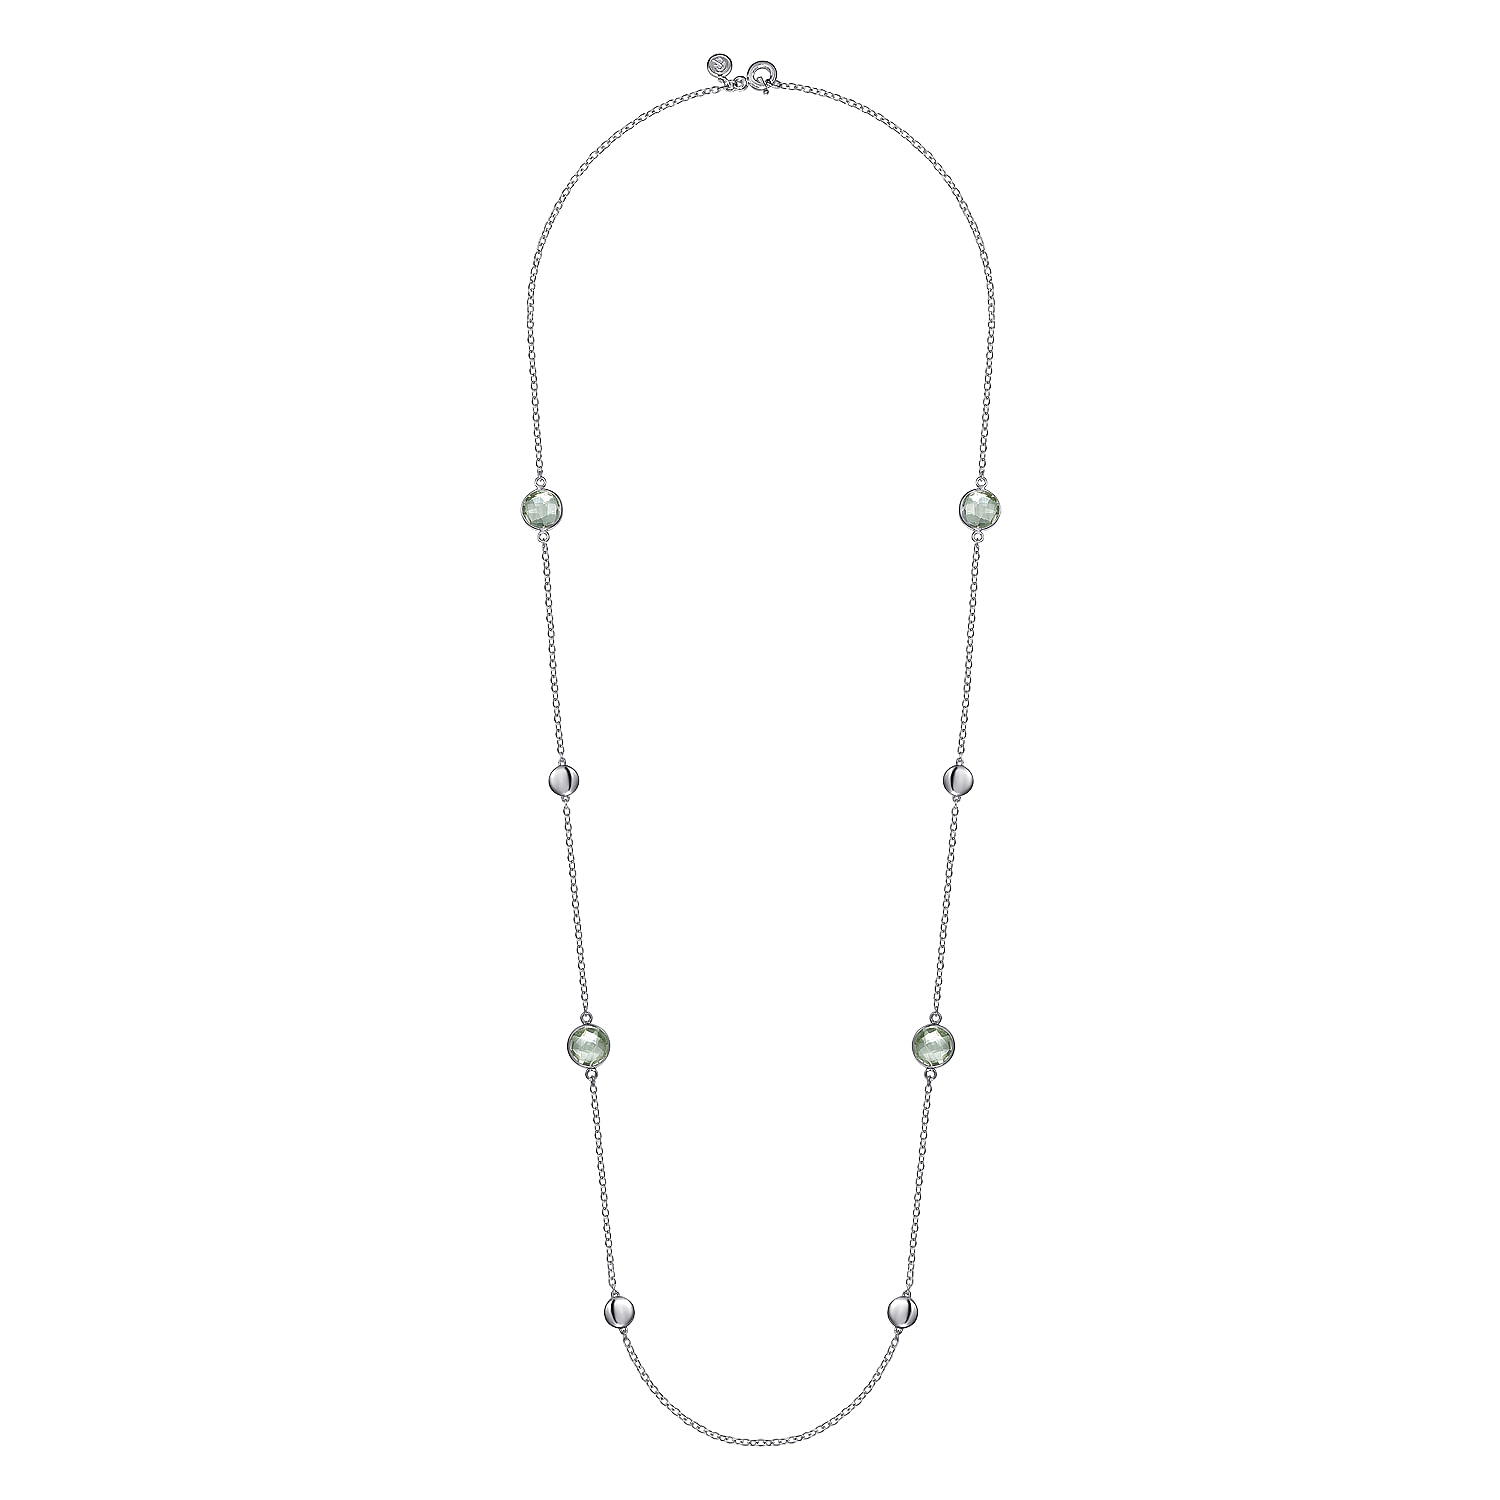 925 Sterling Silver 24 inch Bezel Green Amethyst and Round Hollow Silver Disk Station Necklace